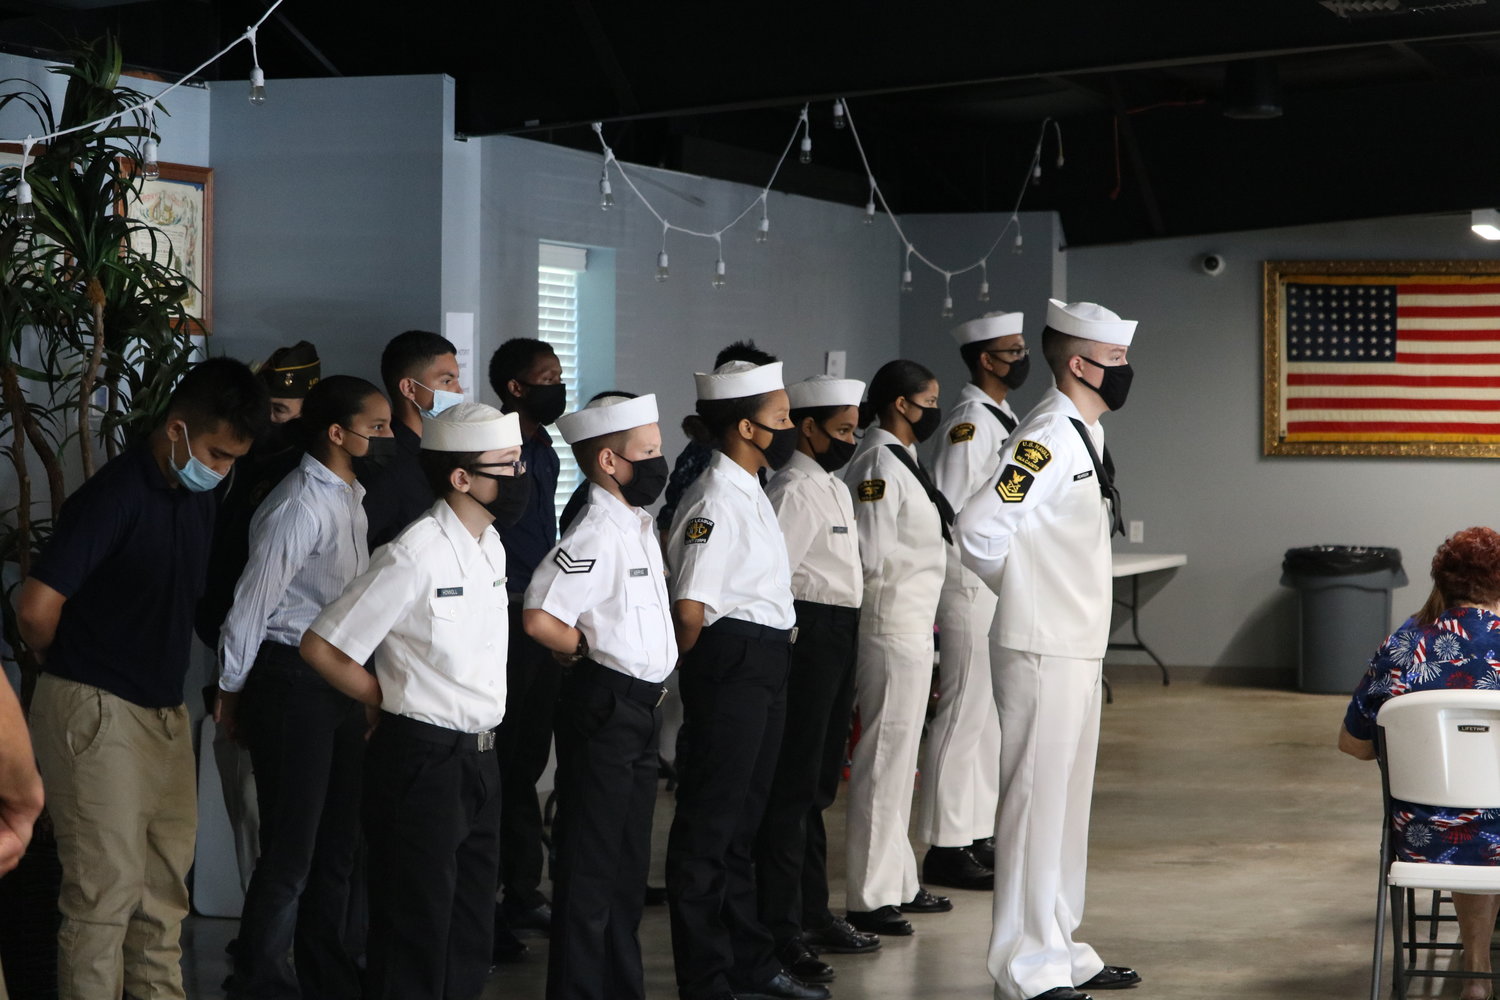 Sea cadets stand during Saturday's 9/11 event at the Katy VFW.